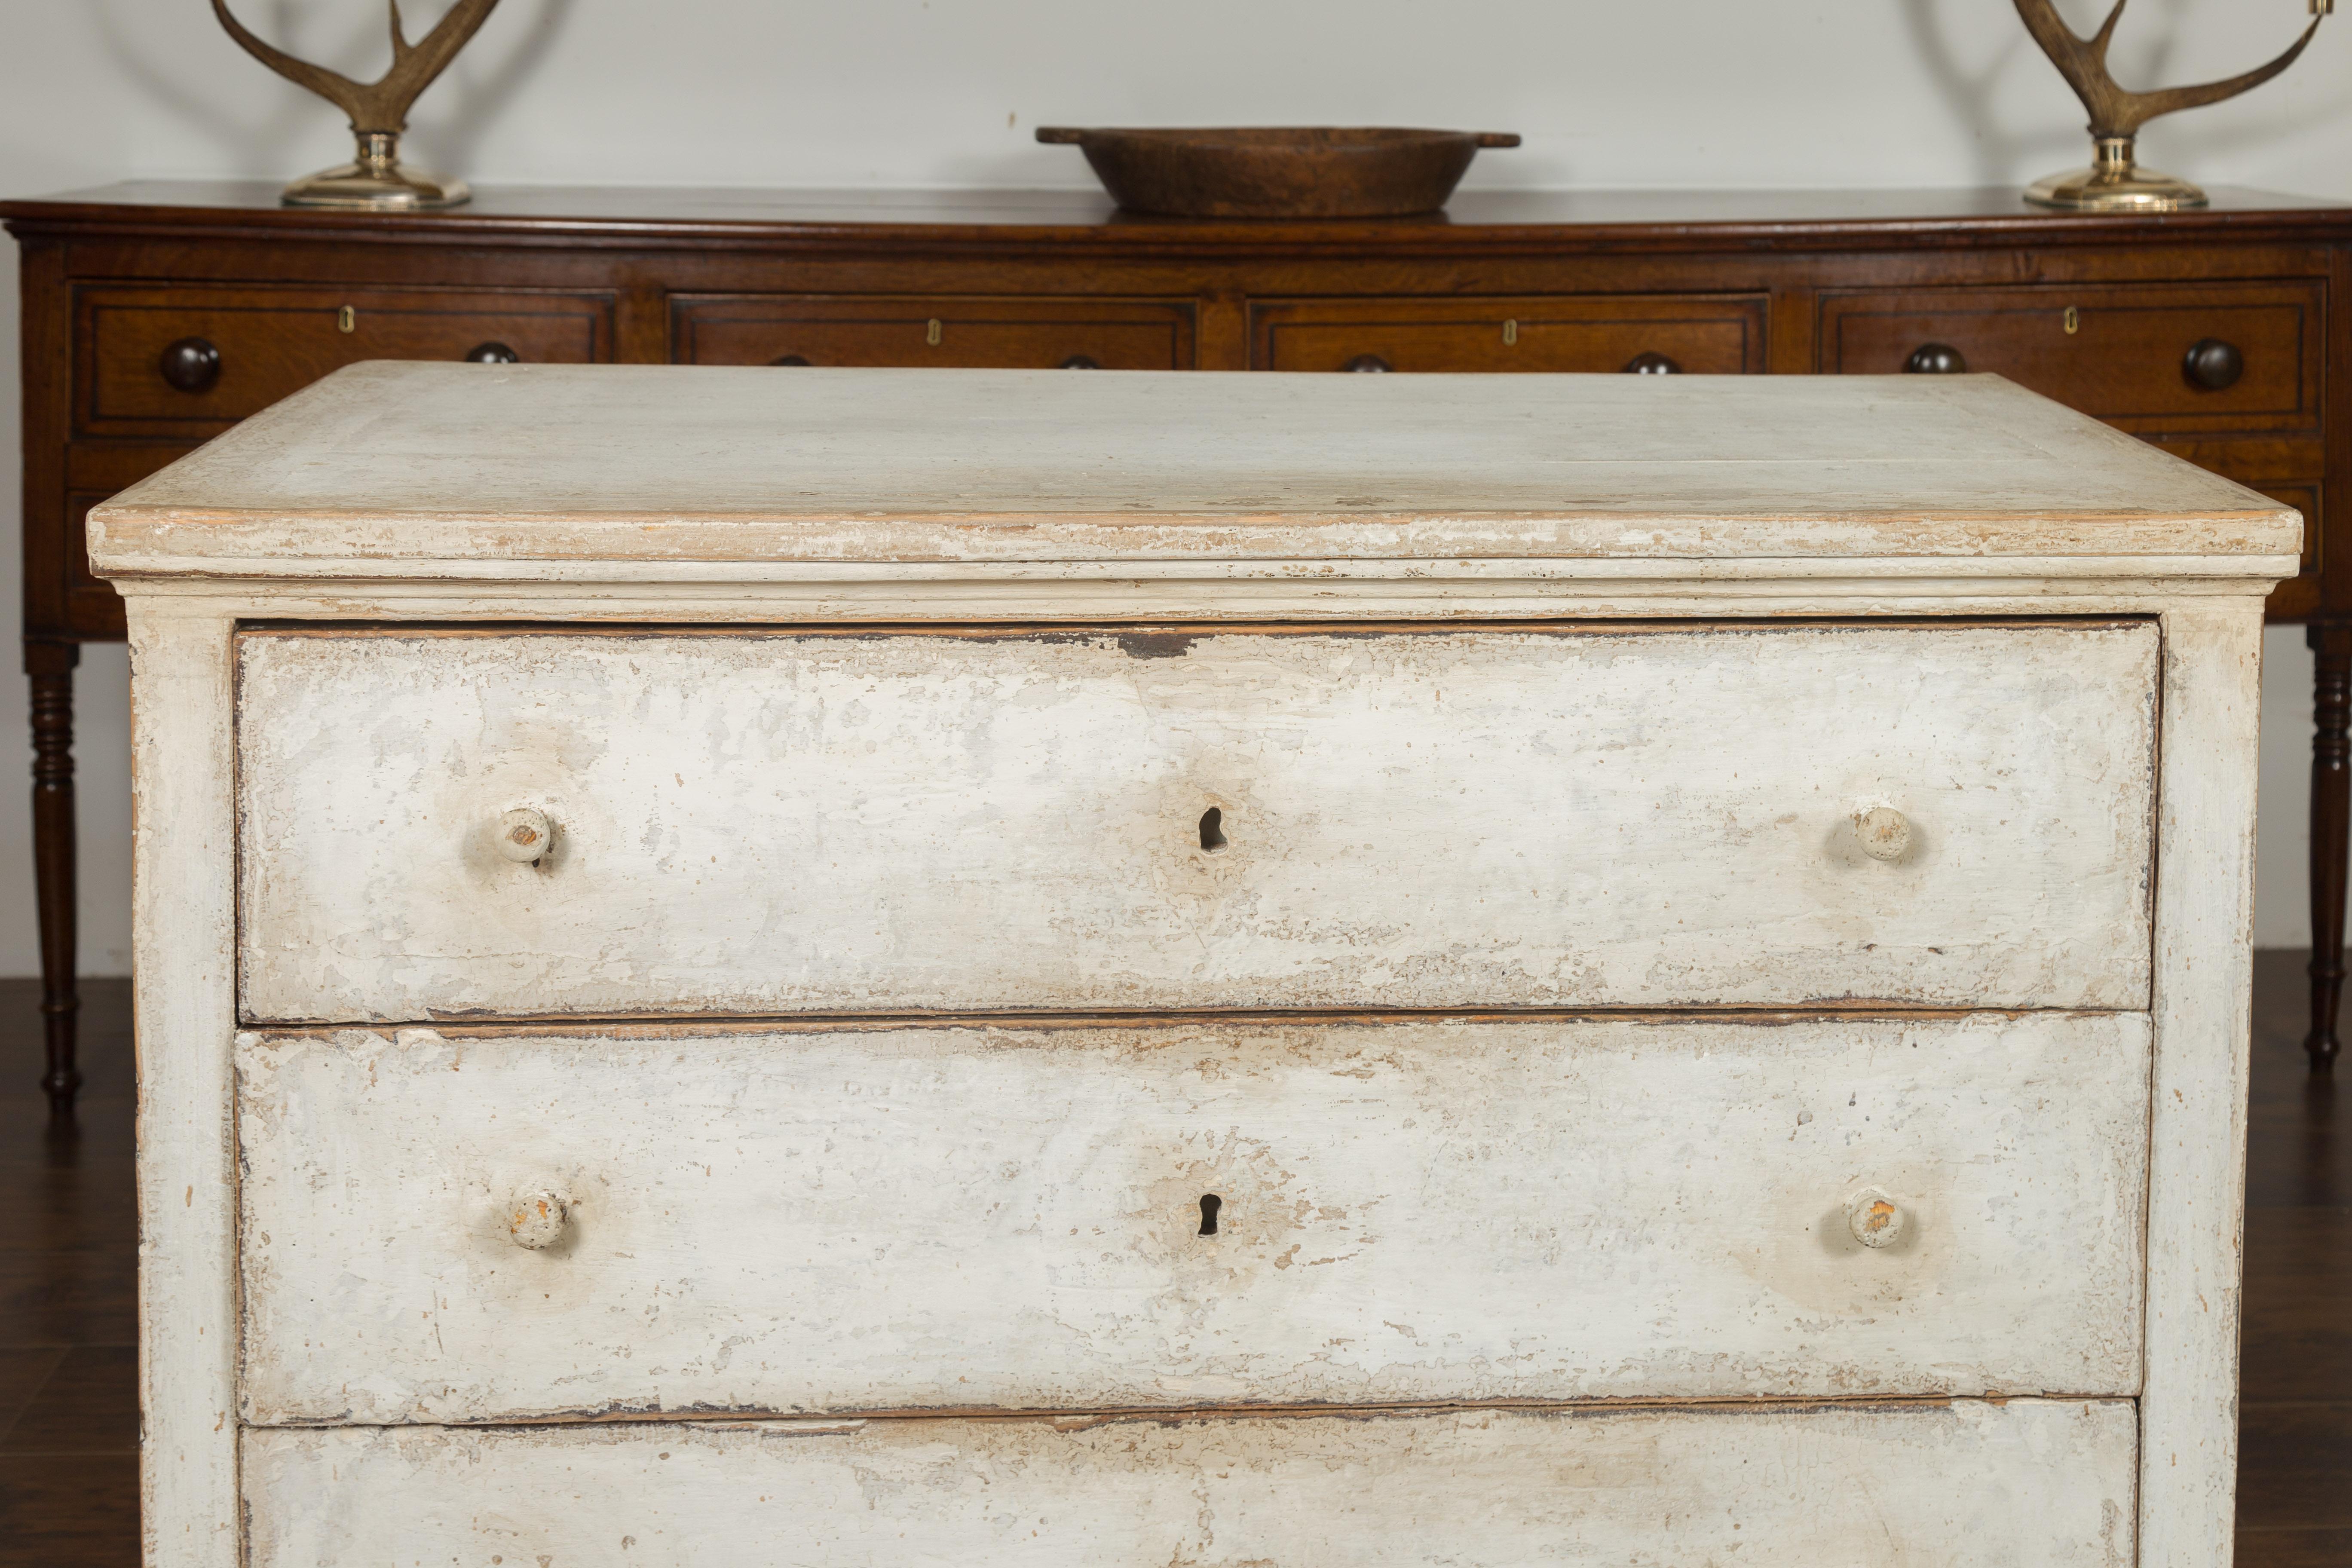 19th Century French 1880s Painted Three-Drawer Chest with Tapered Feet and Distressed Patina